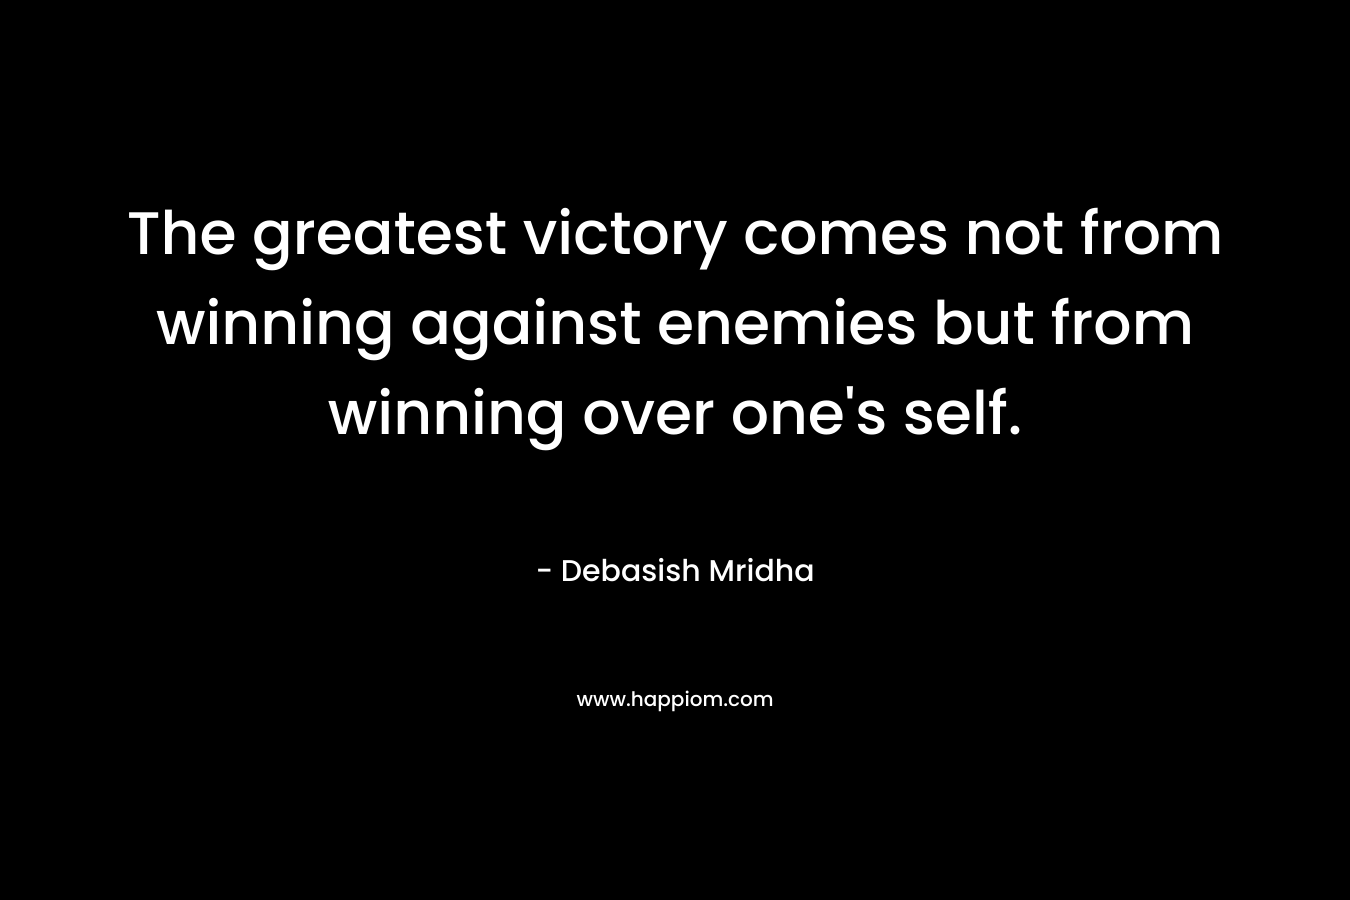 The greatest victory comes not from winning against enemies but from winning over one's self.